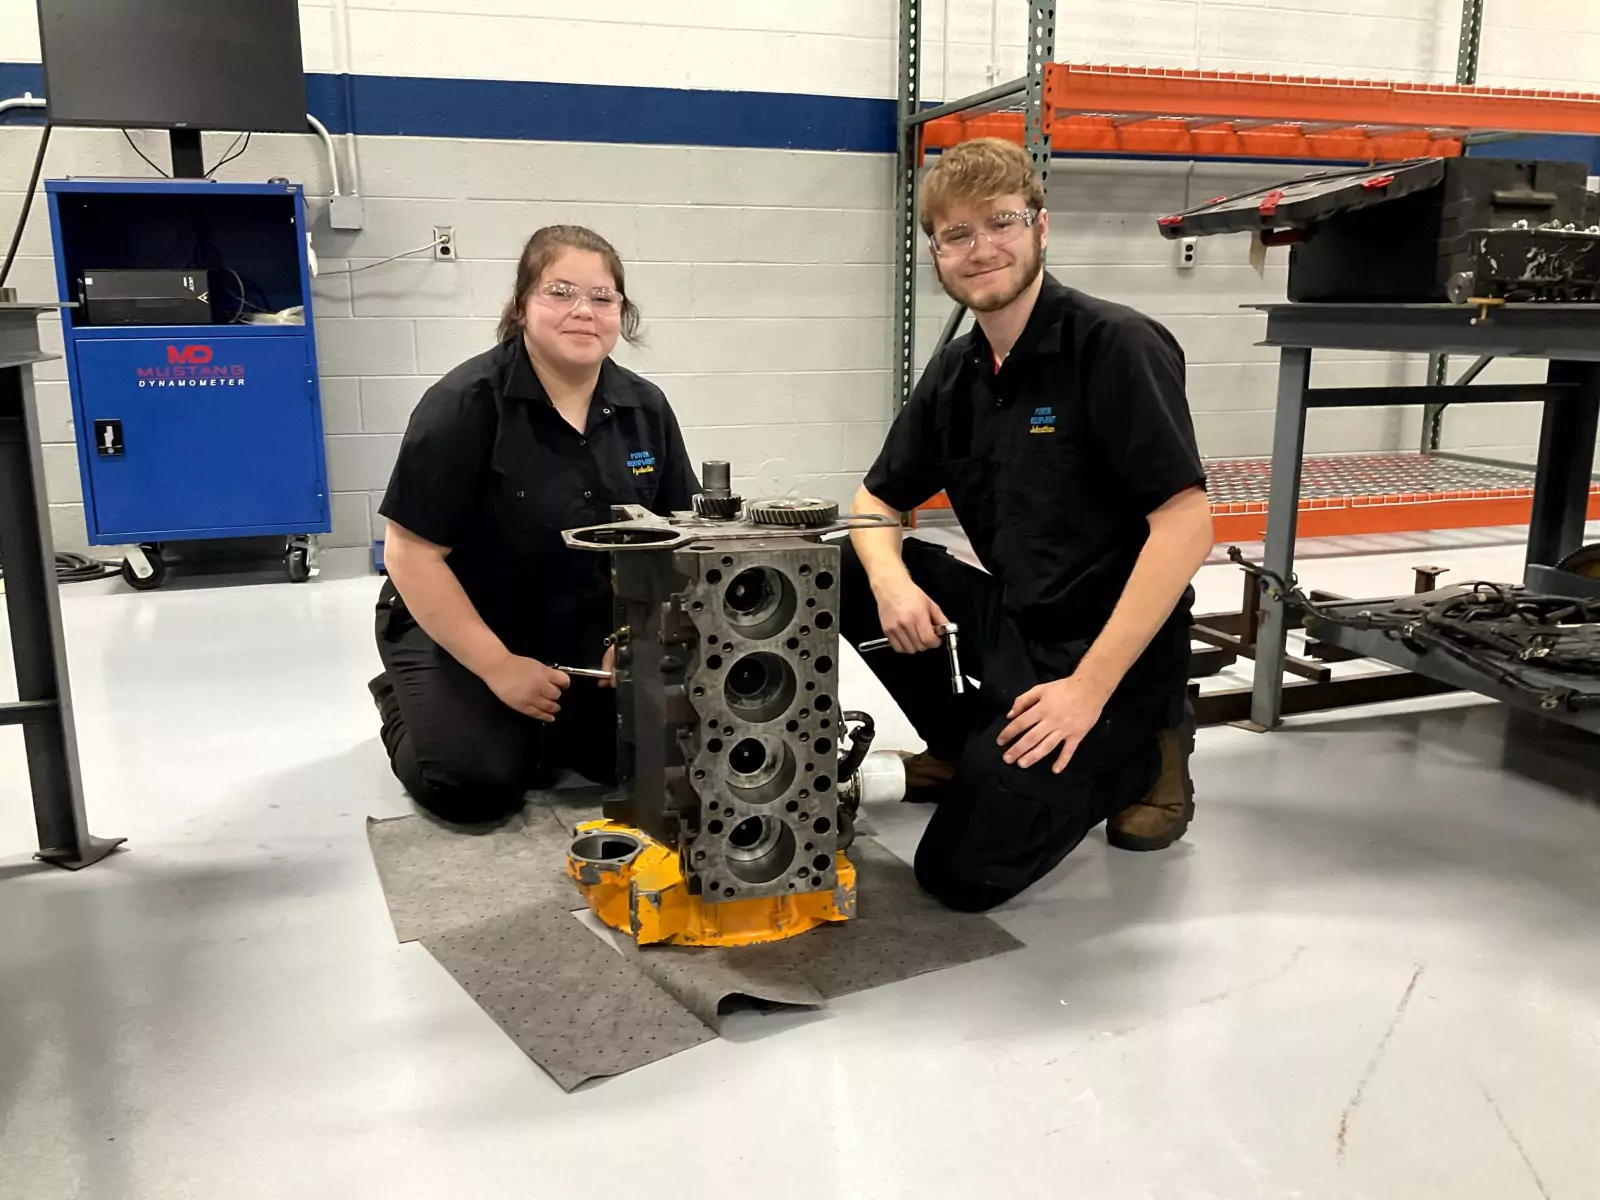 two students learning about power equipment mechanics